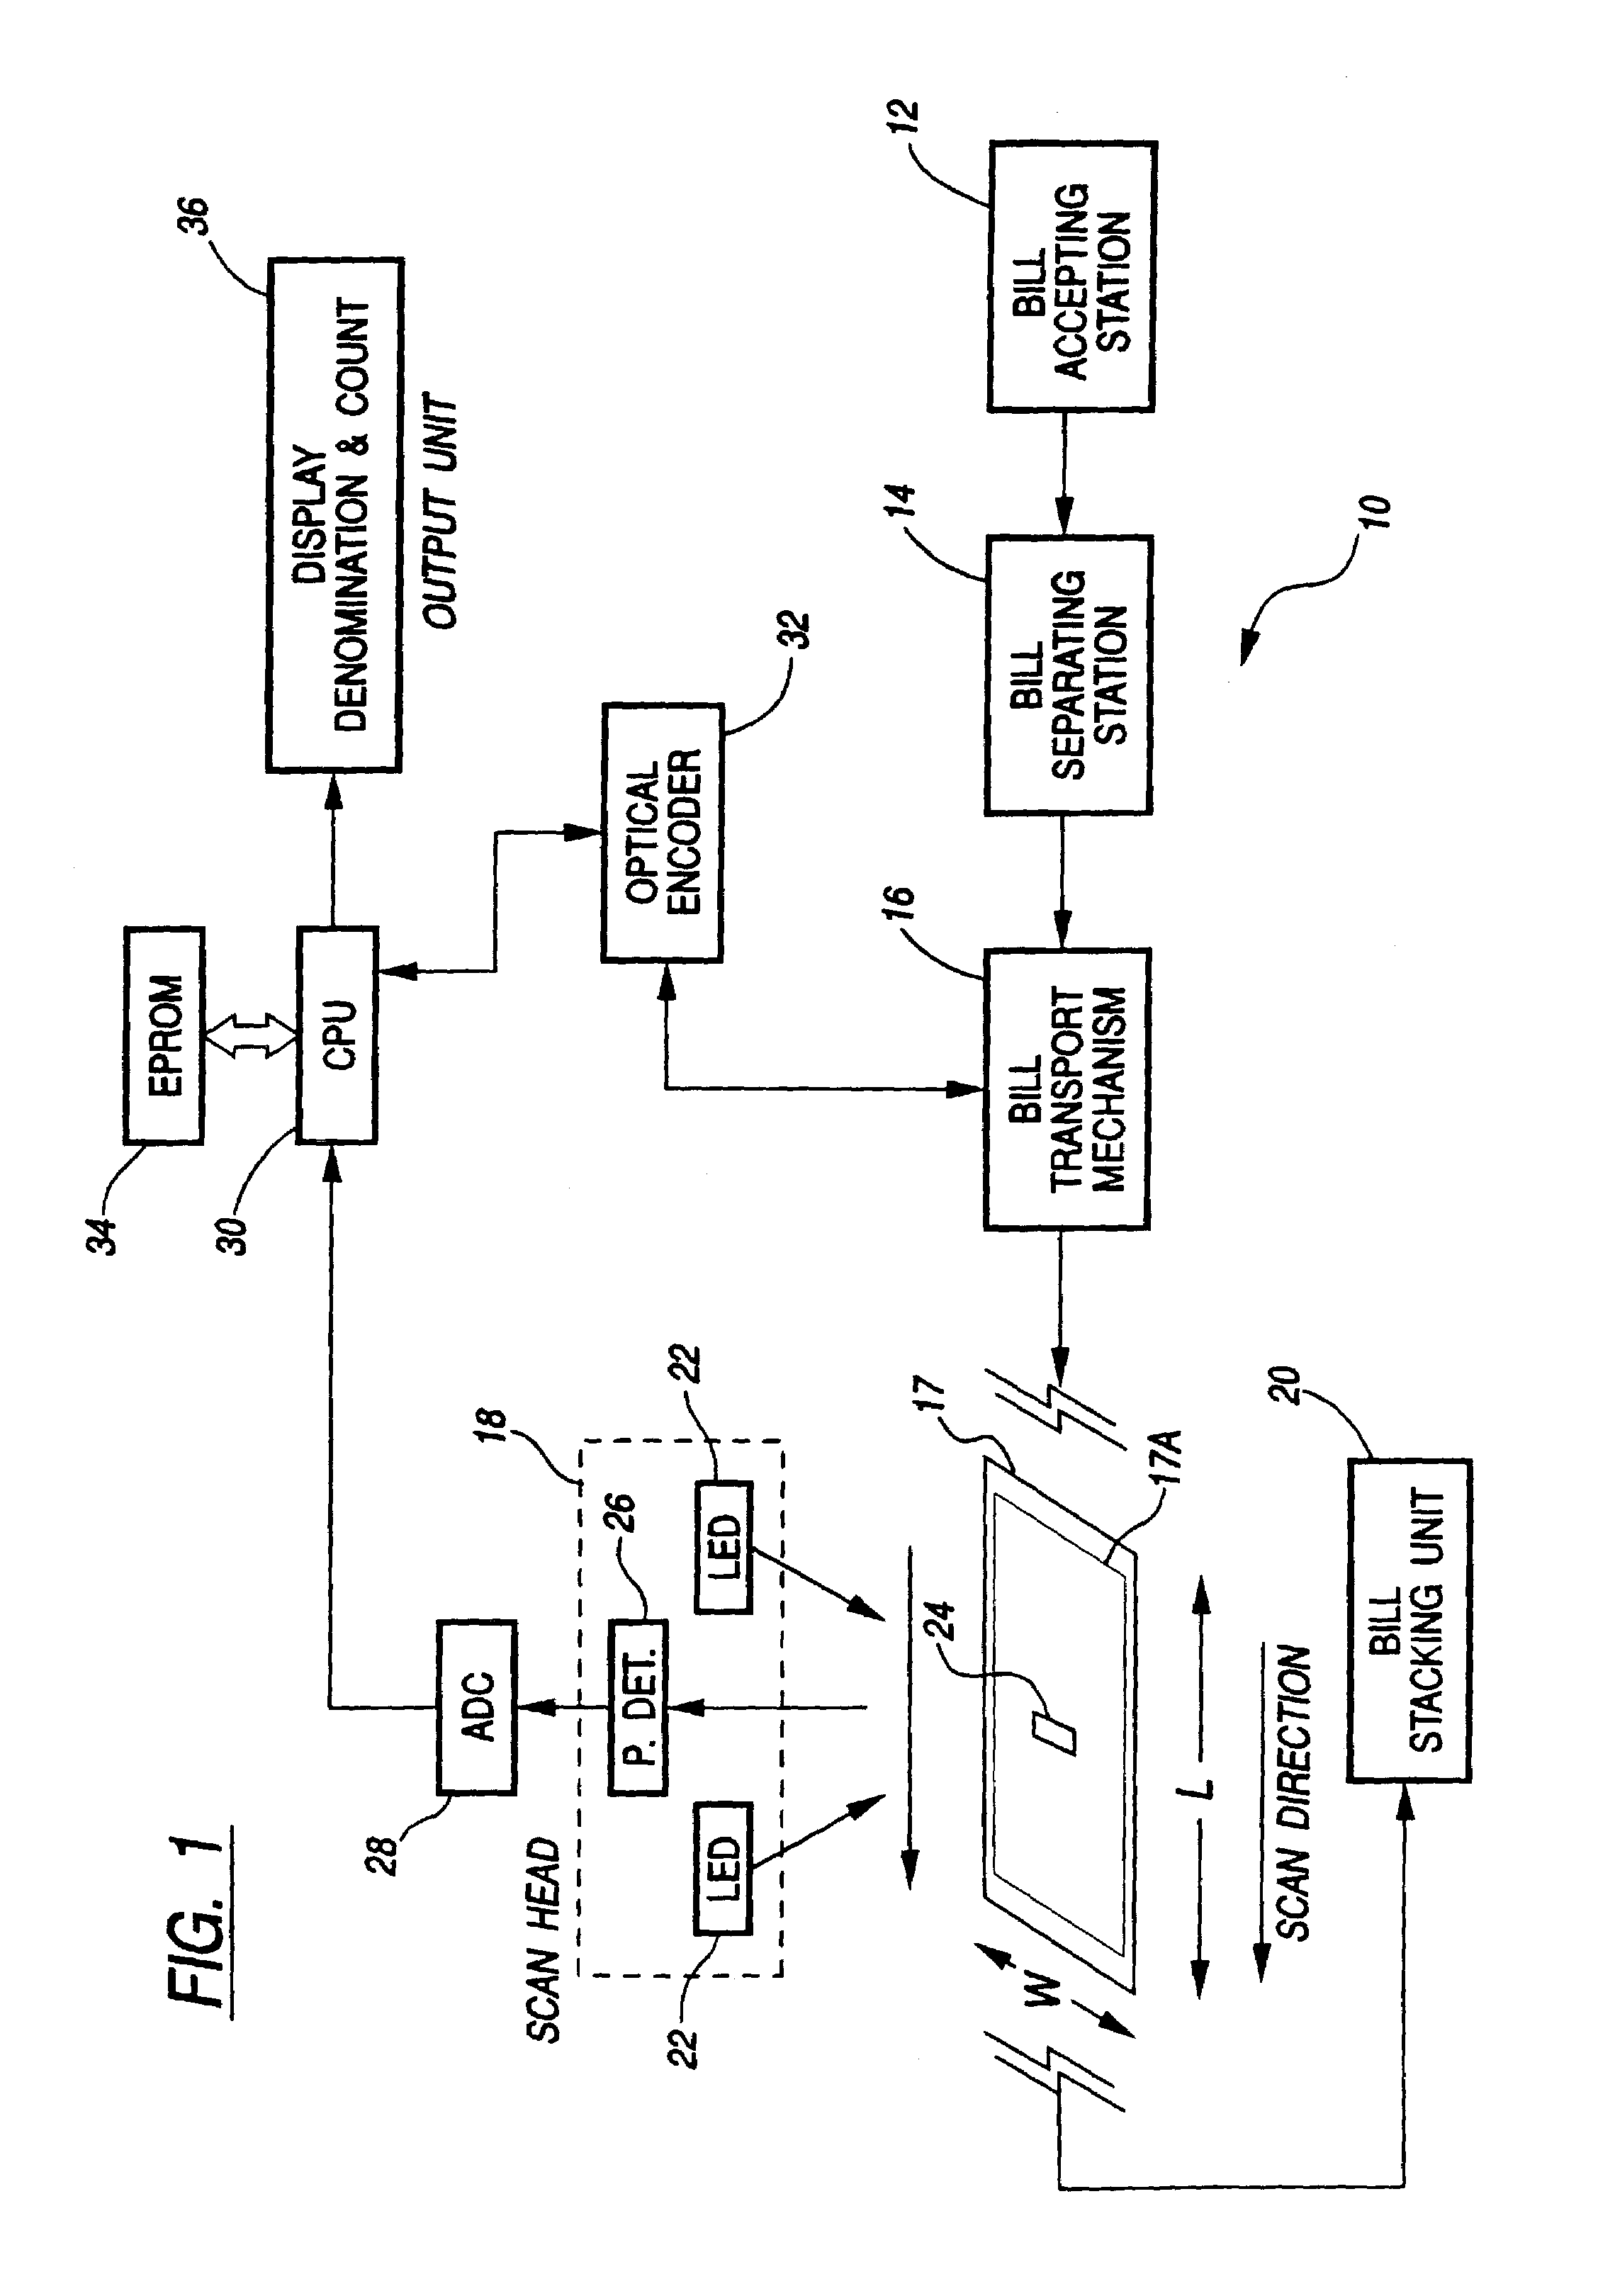 Method and apparatus for currency discrimination